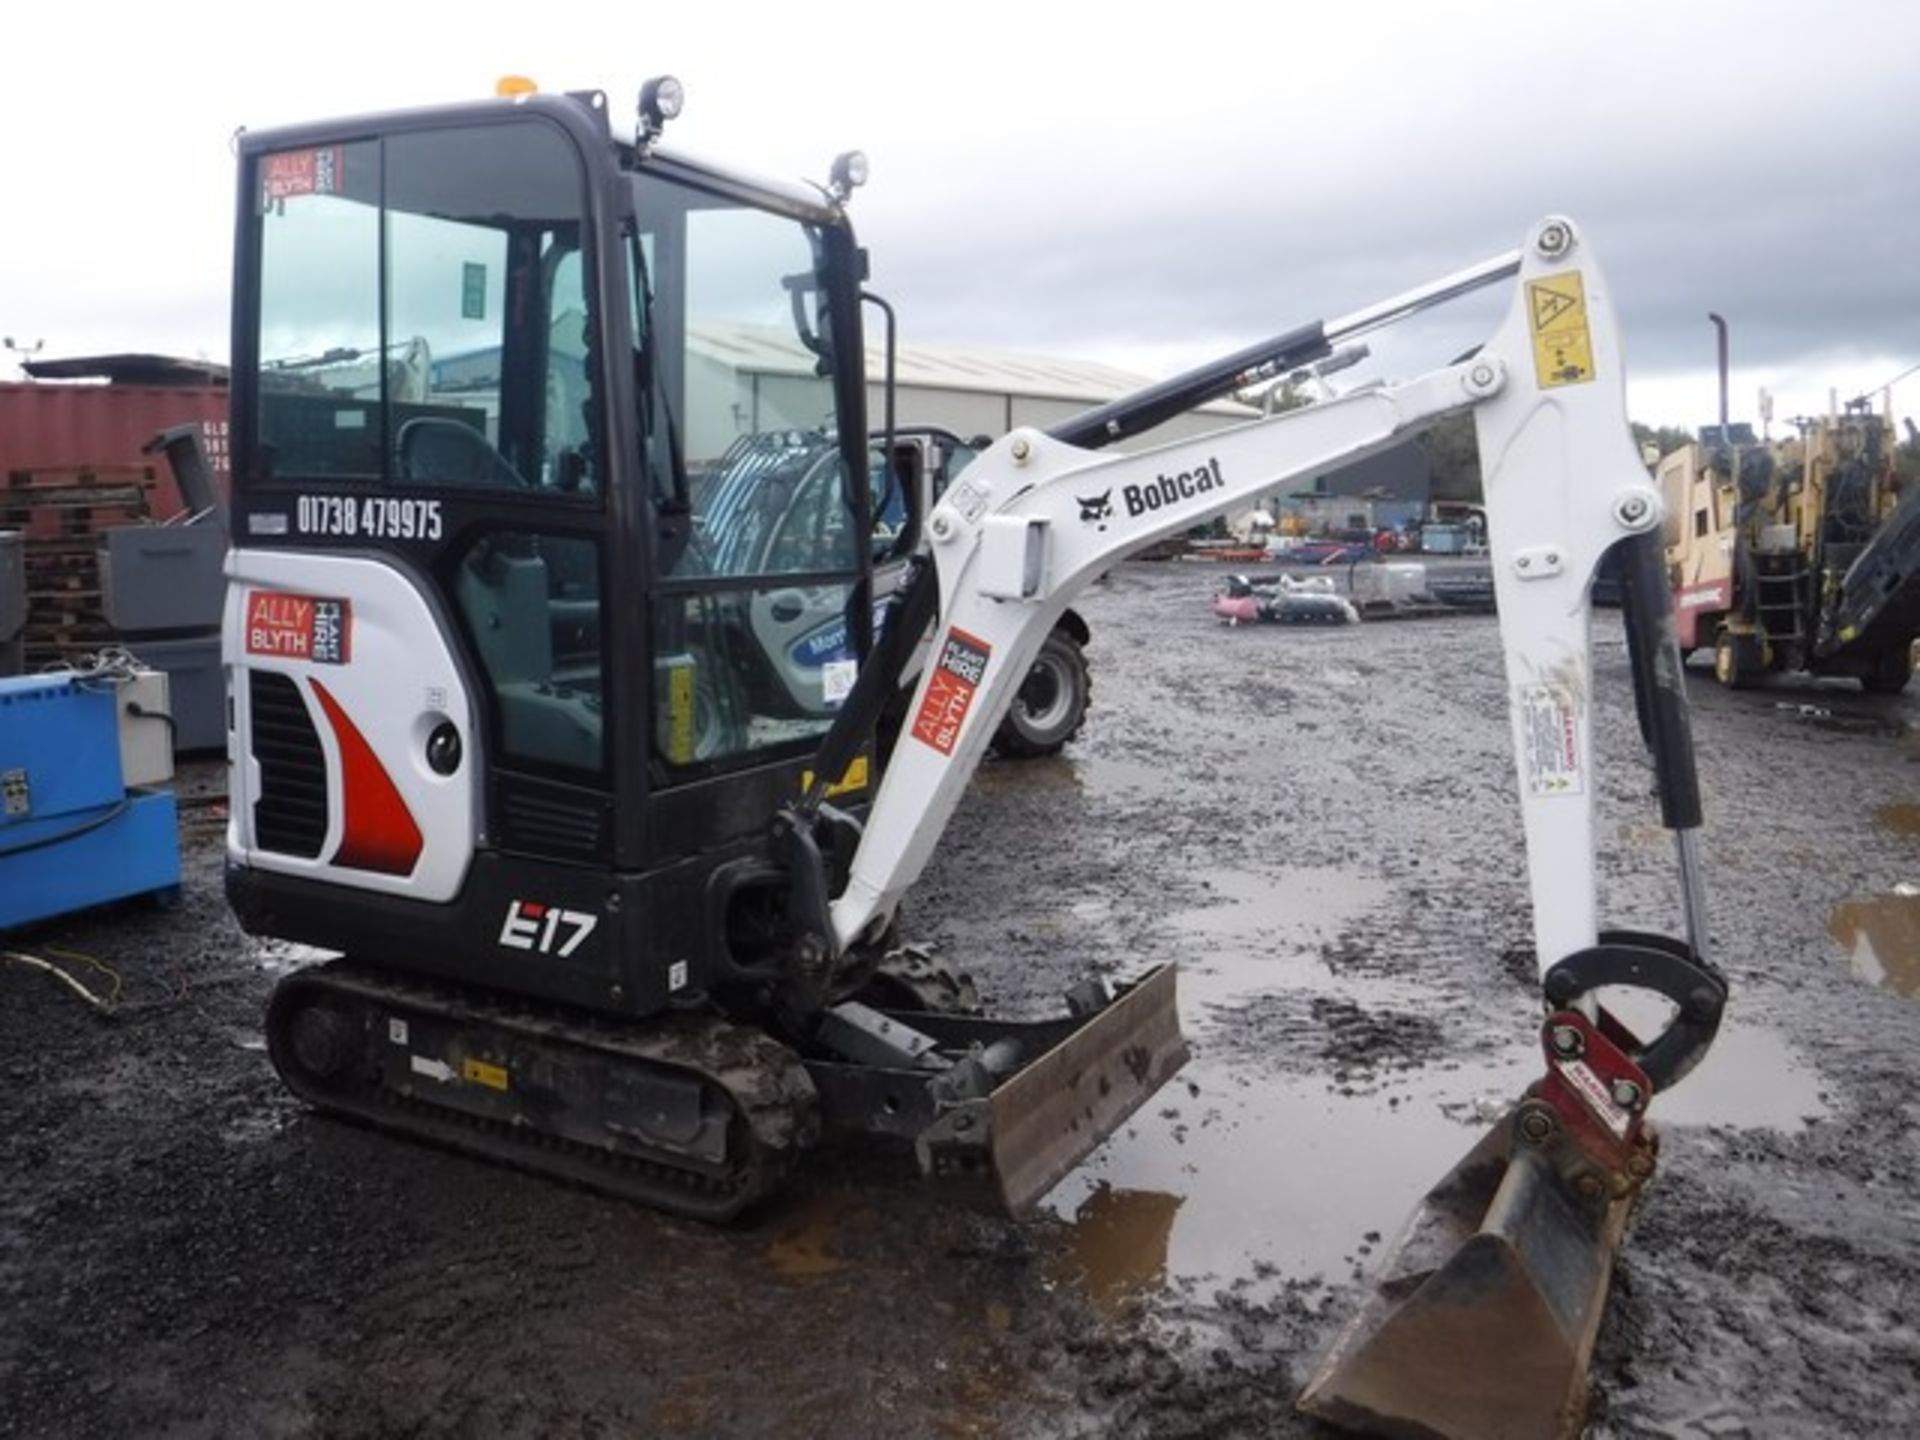 BOB CAT E17 - 2018 COMPACT EXCAVATOR WITH CAB 182 HRS (NOT VERIFIED) SN - 11001586 - Image 8 of 9